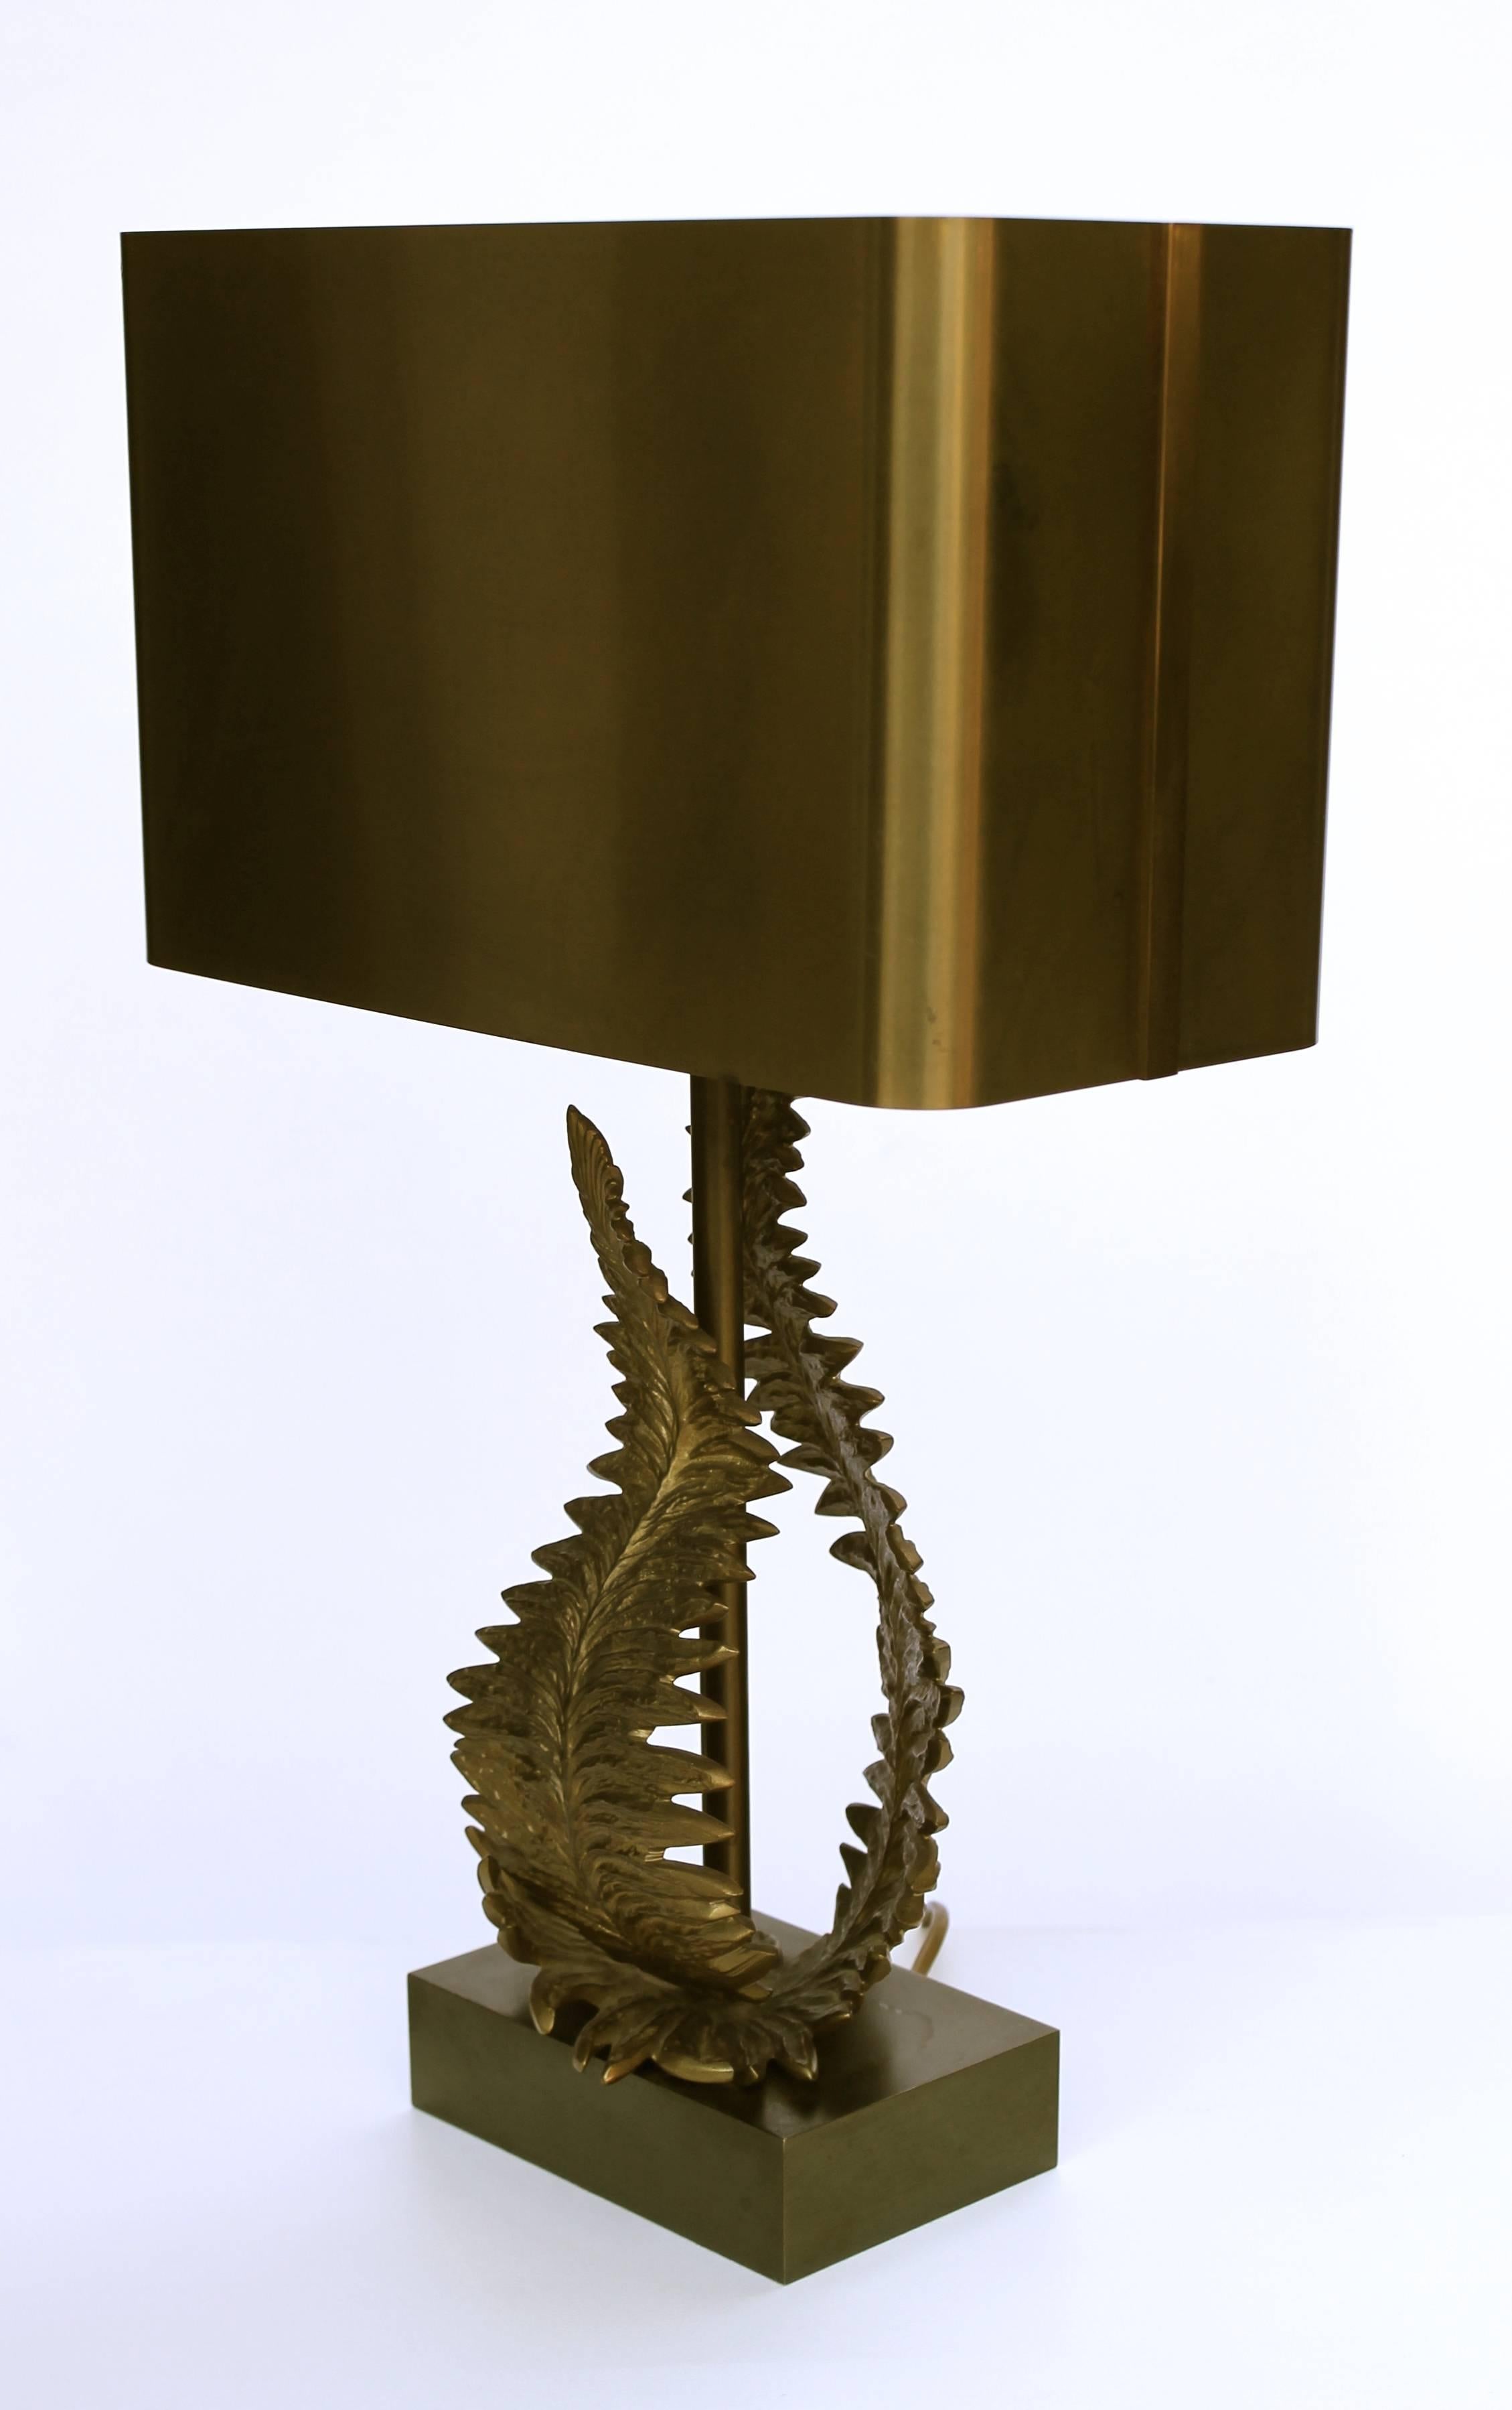 A signed Maison Charles table lamp, made of two fern leaves in bronze. The shade and the base are also in solid, patinated bronze. 
Signed: 'Charles' 'Made in France.'